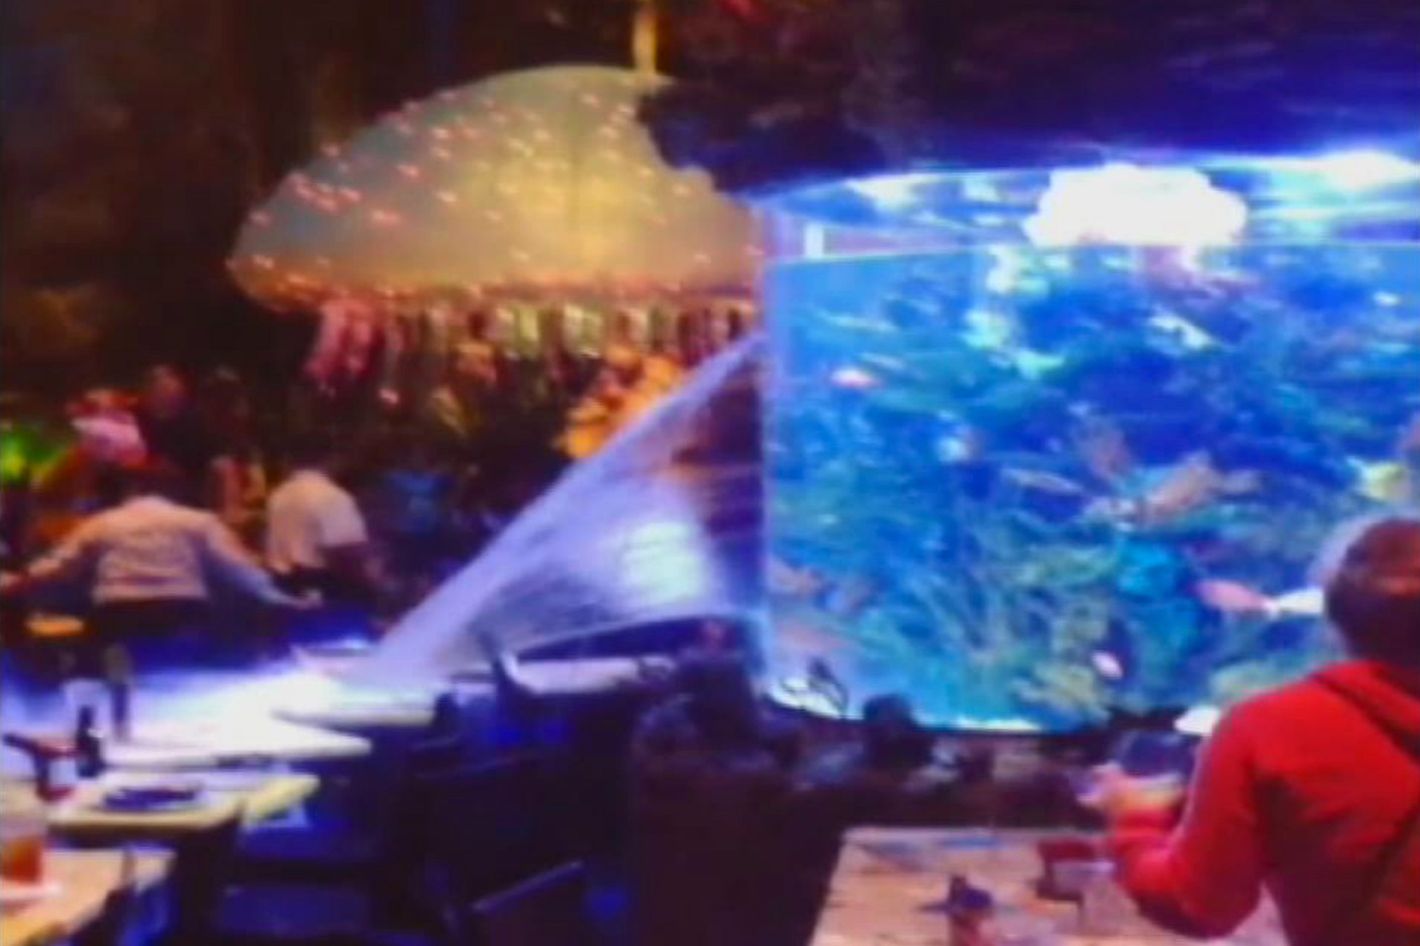 Giant fish tank bursts in a Disney restaurant, sprays water all over  patrons!